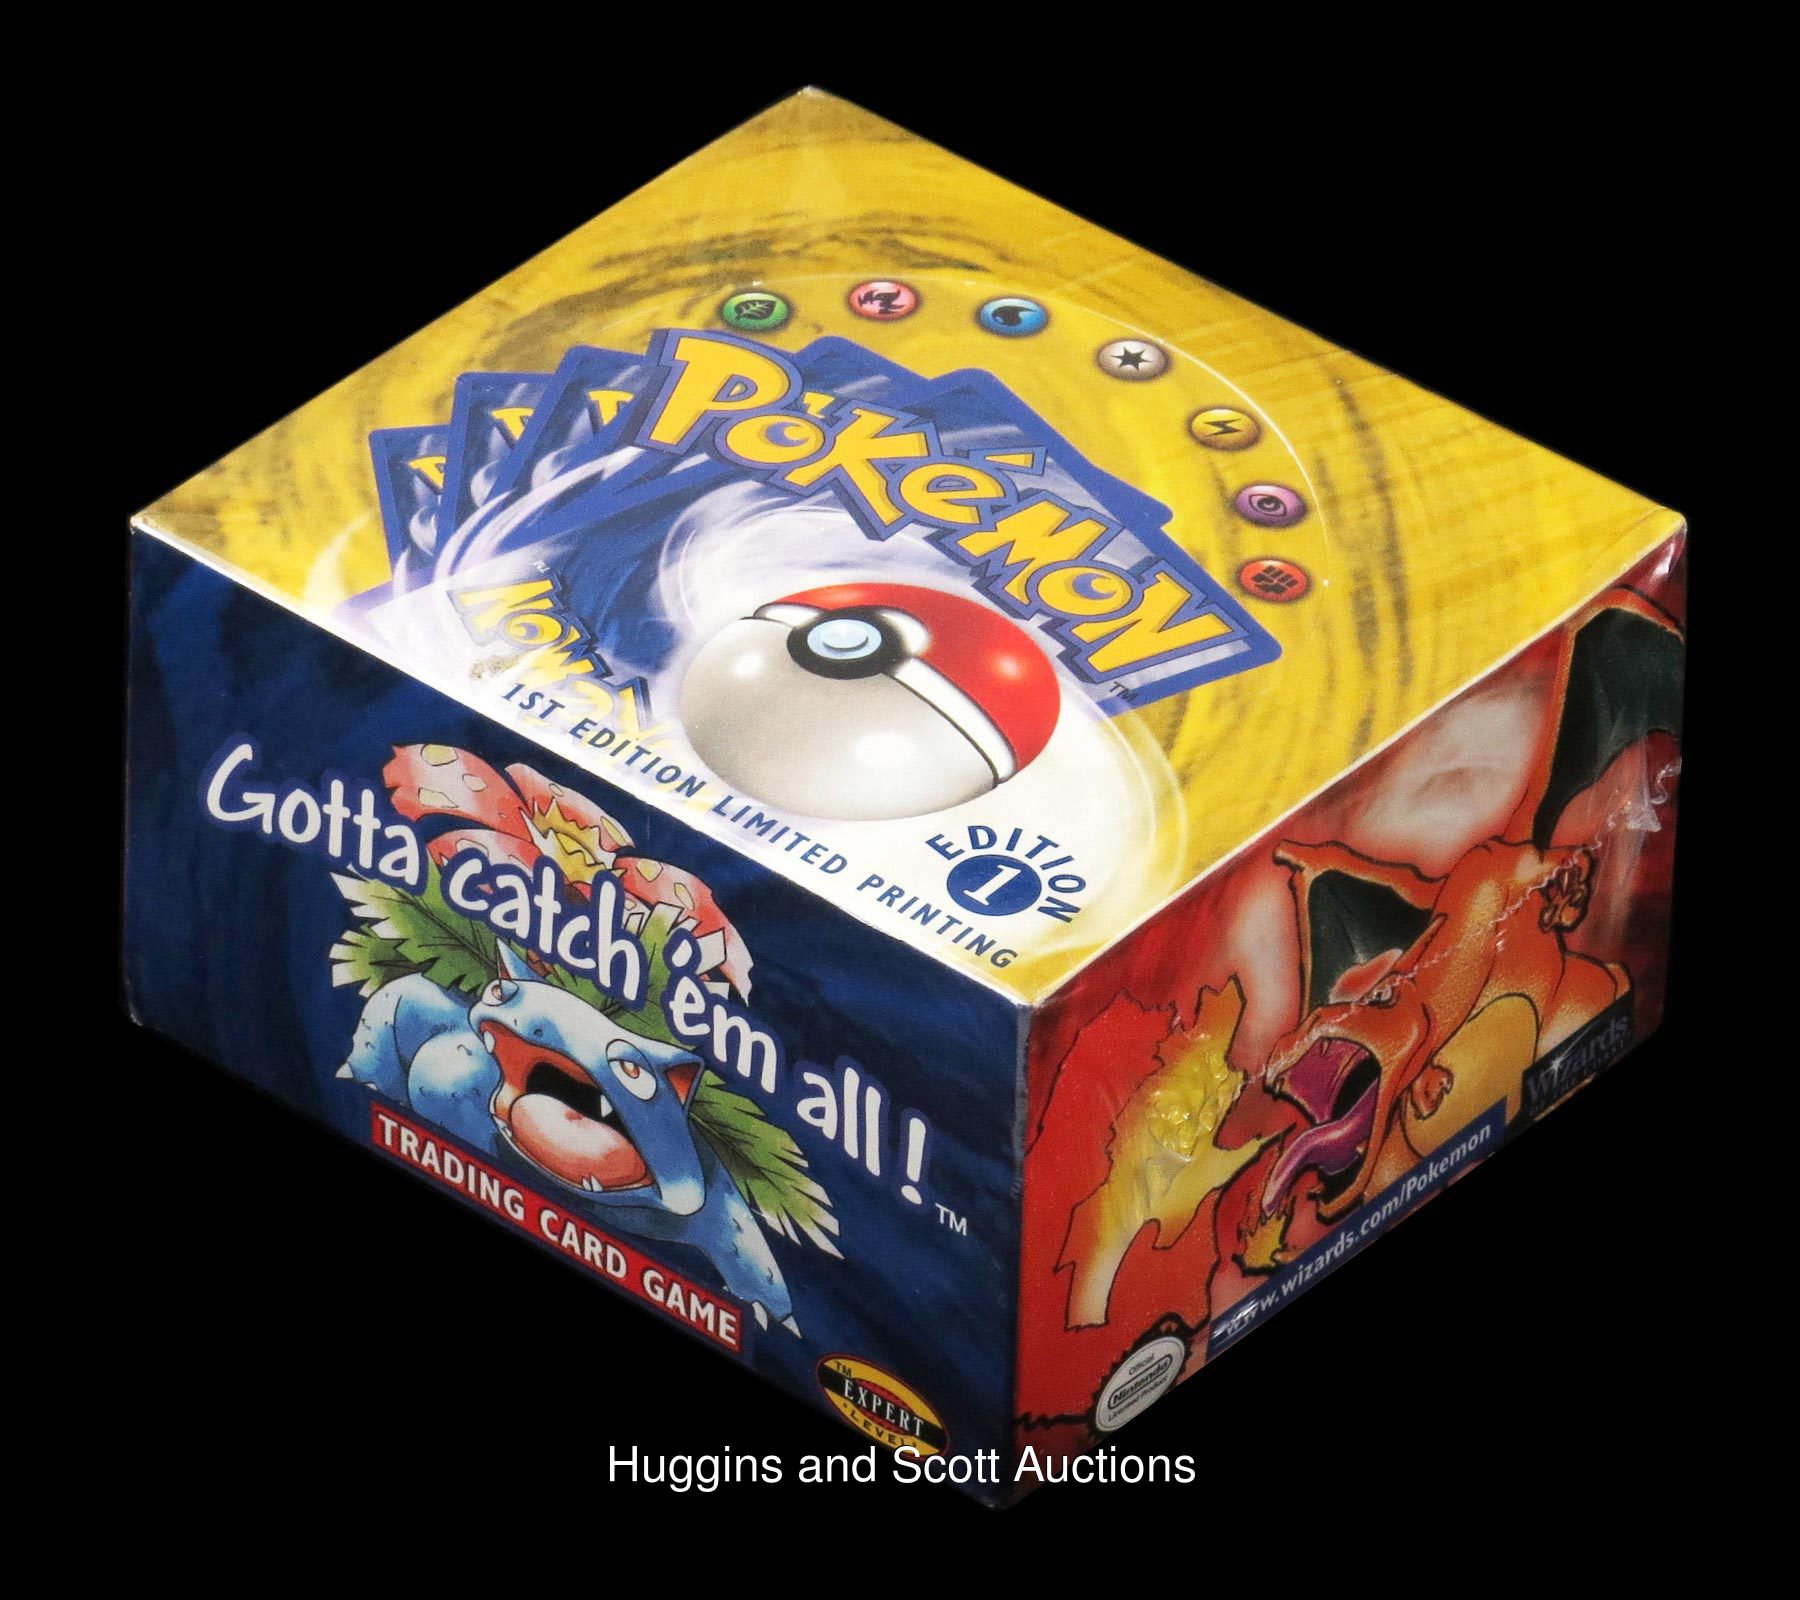 where to buy pokemon cards booster boxes